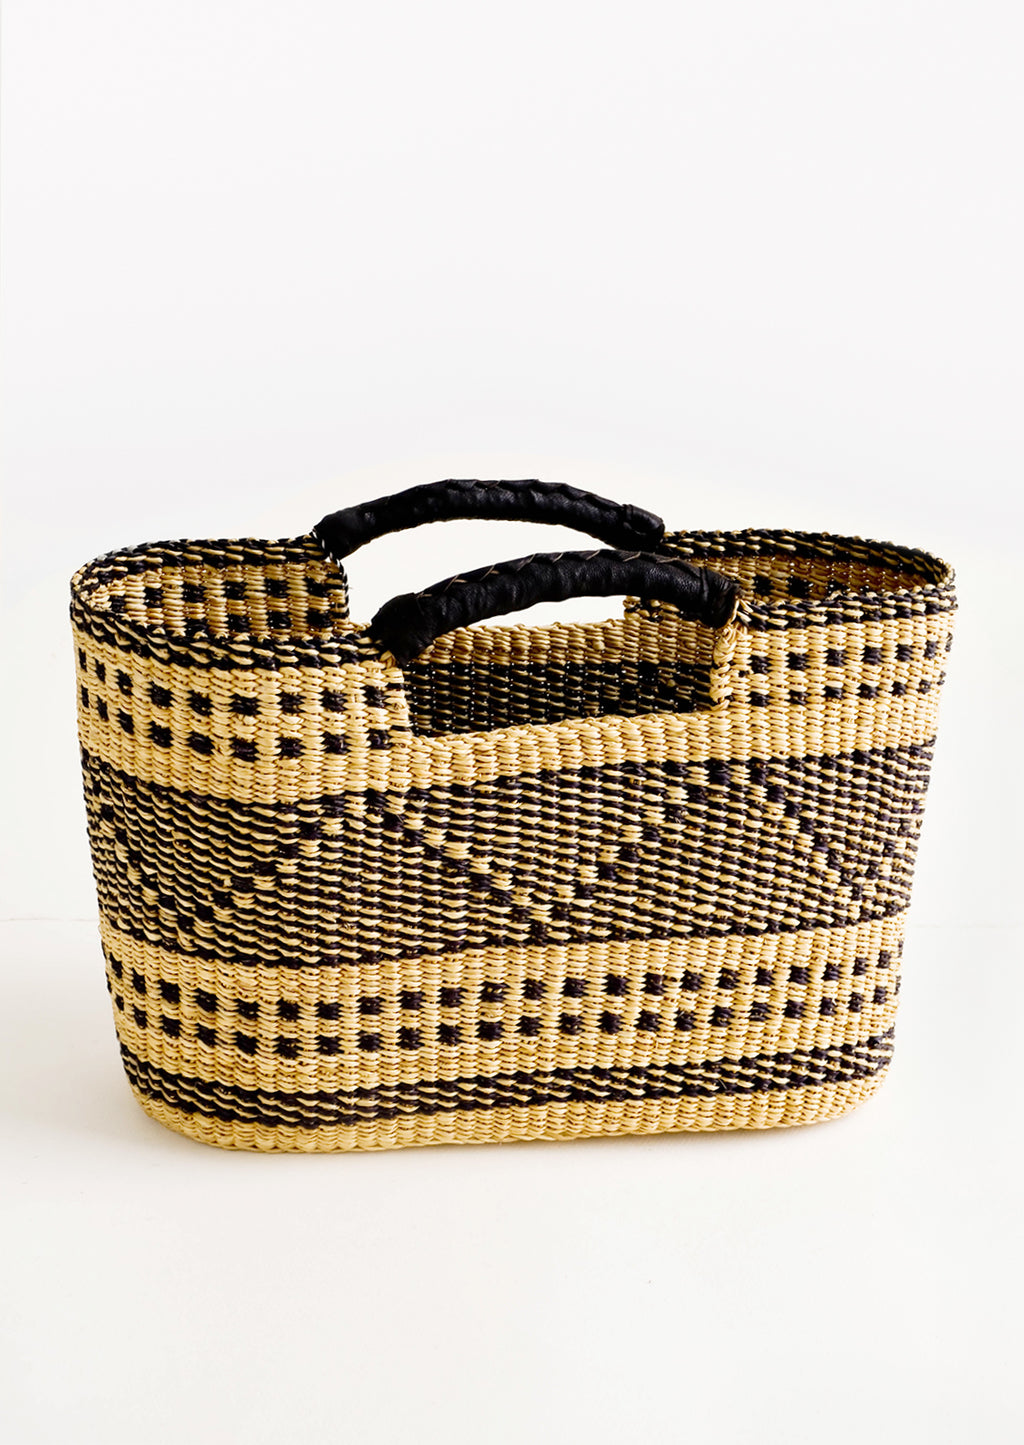 1: Woven tote made from natural and black dried grass, with geometric design and leather cutout handles